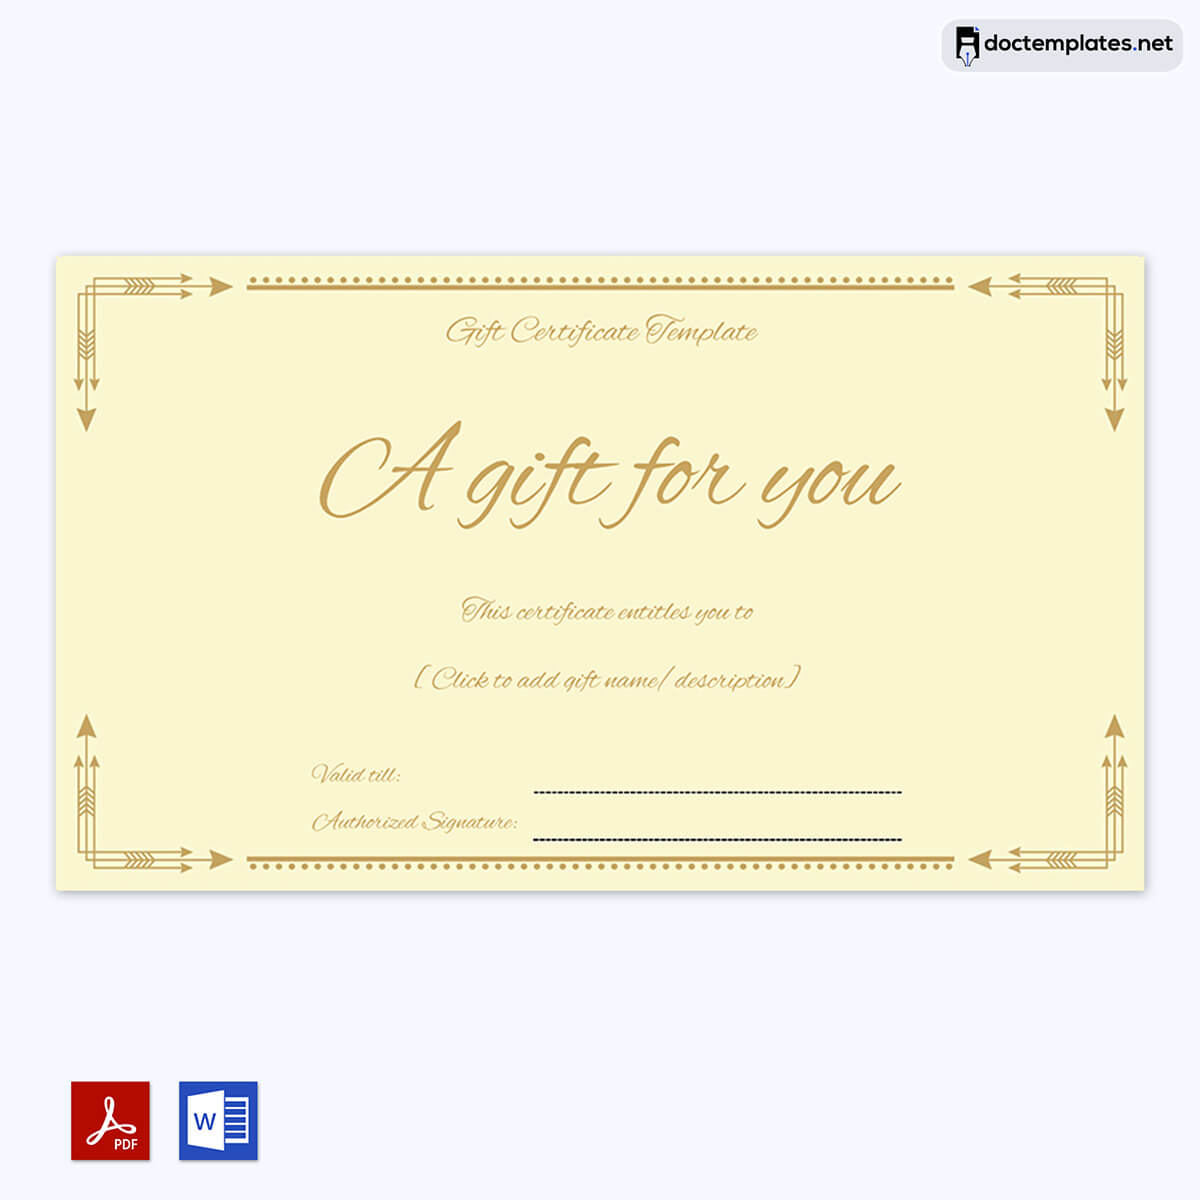 Formal Business Gift Certificate